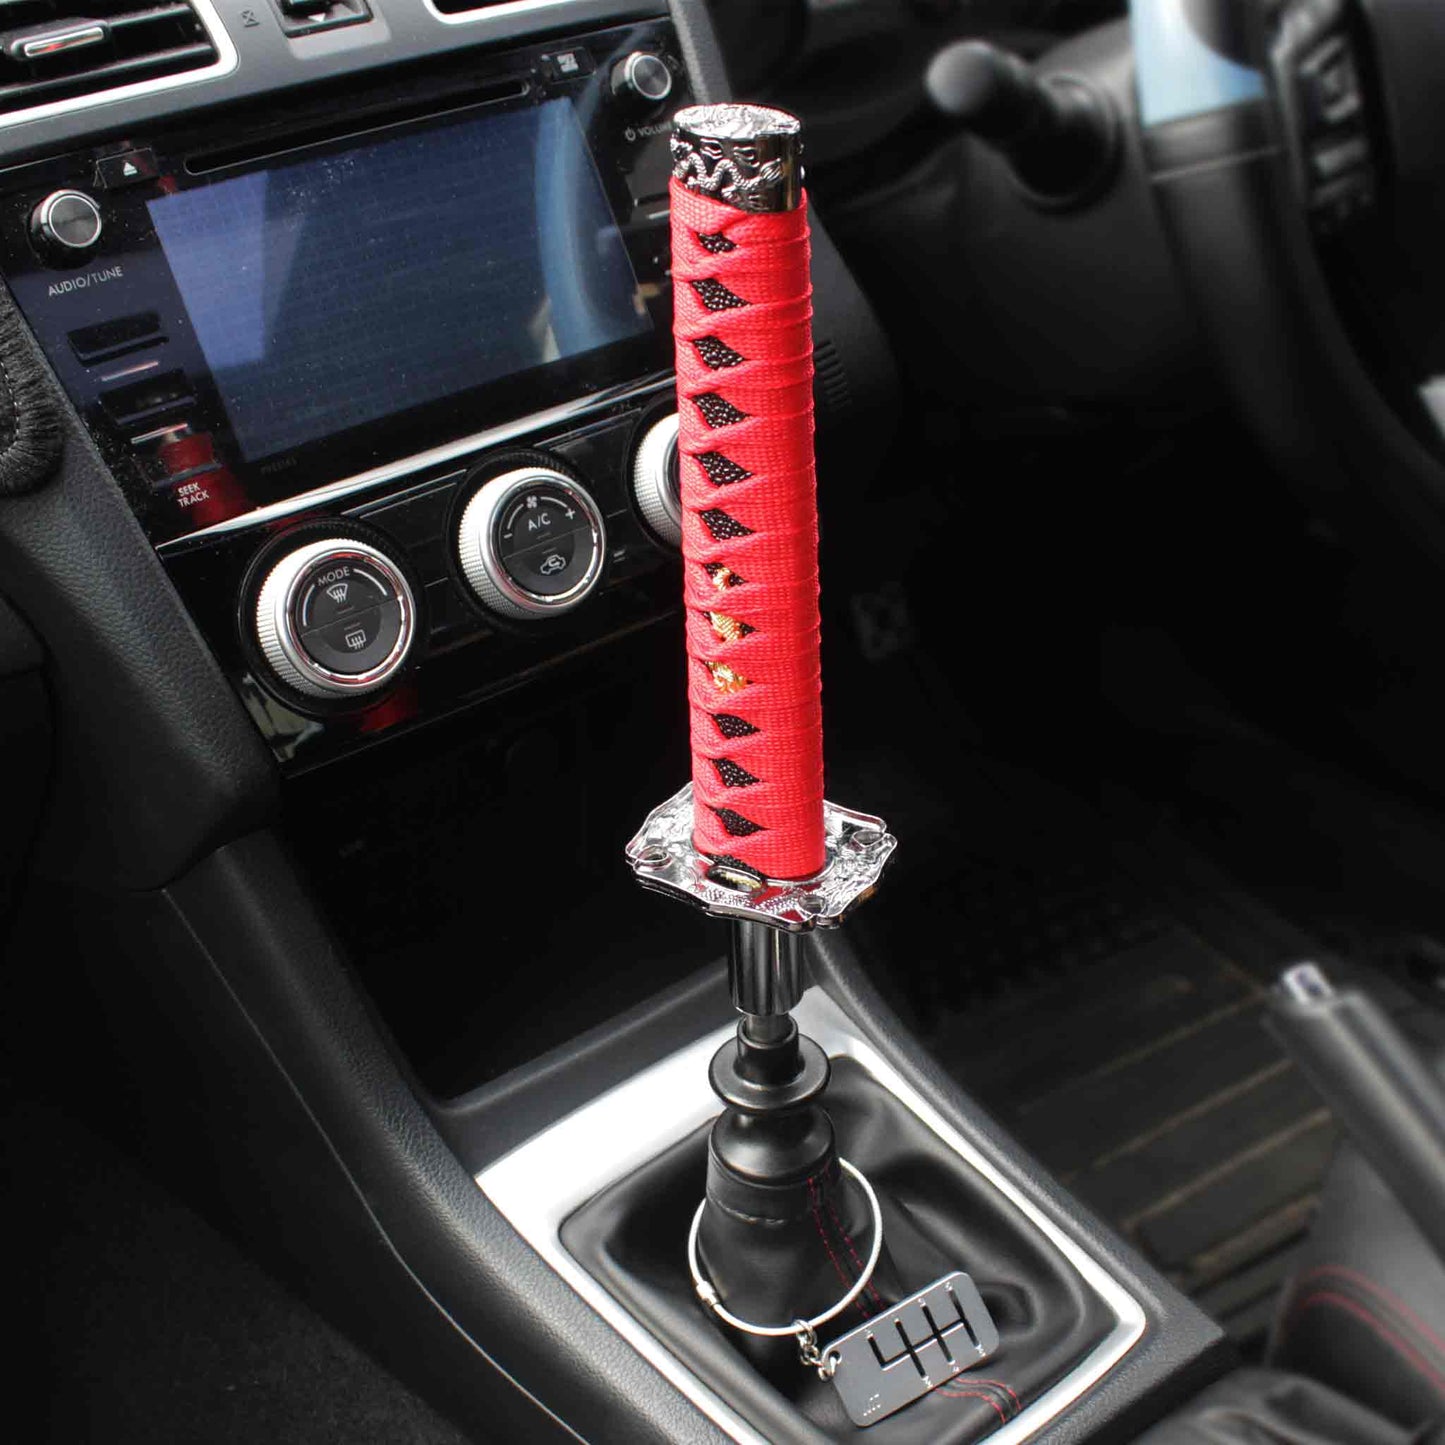 A red katana shift knob is installed on a manual WRX, and a six-speed dog-tag is hanging around the shift boot